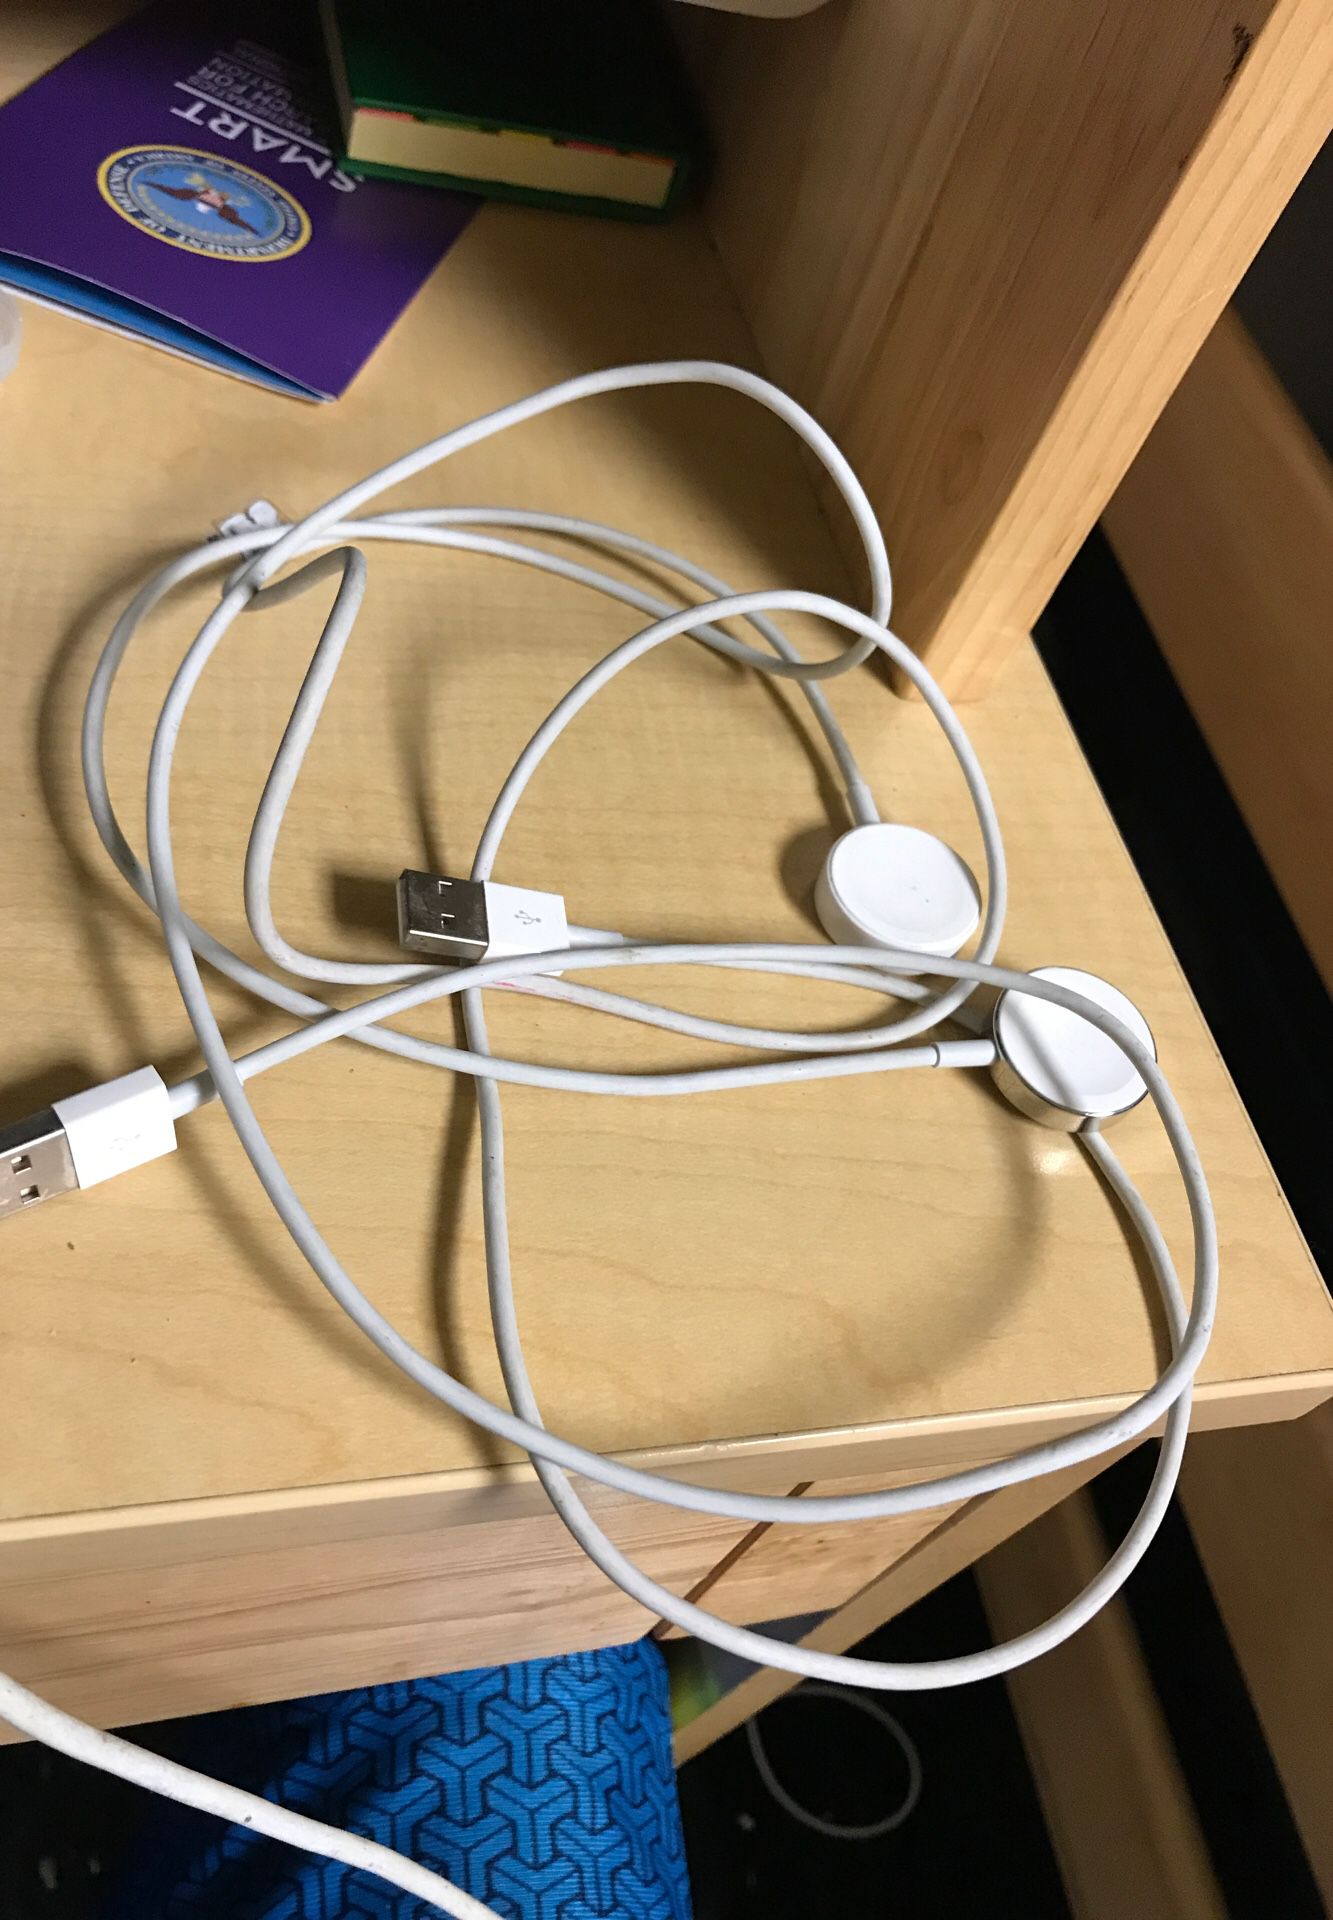 2 Apple Watch chargers